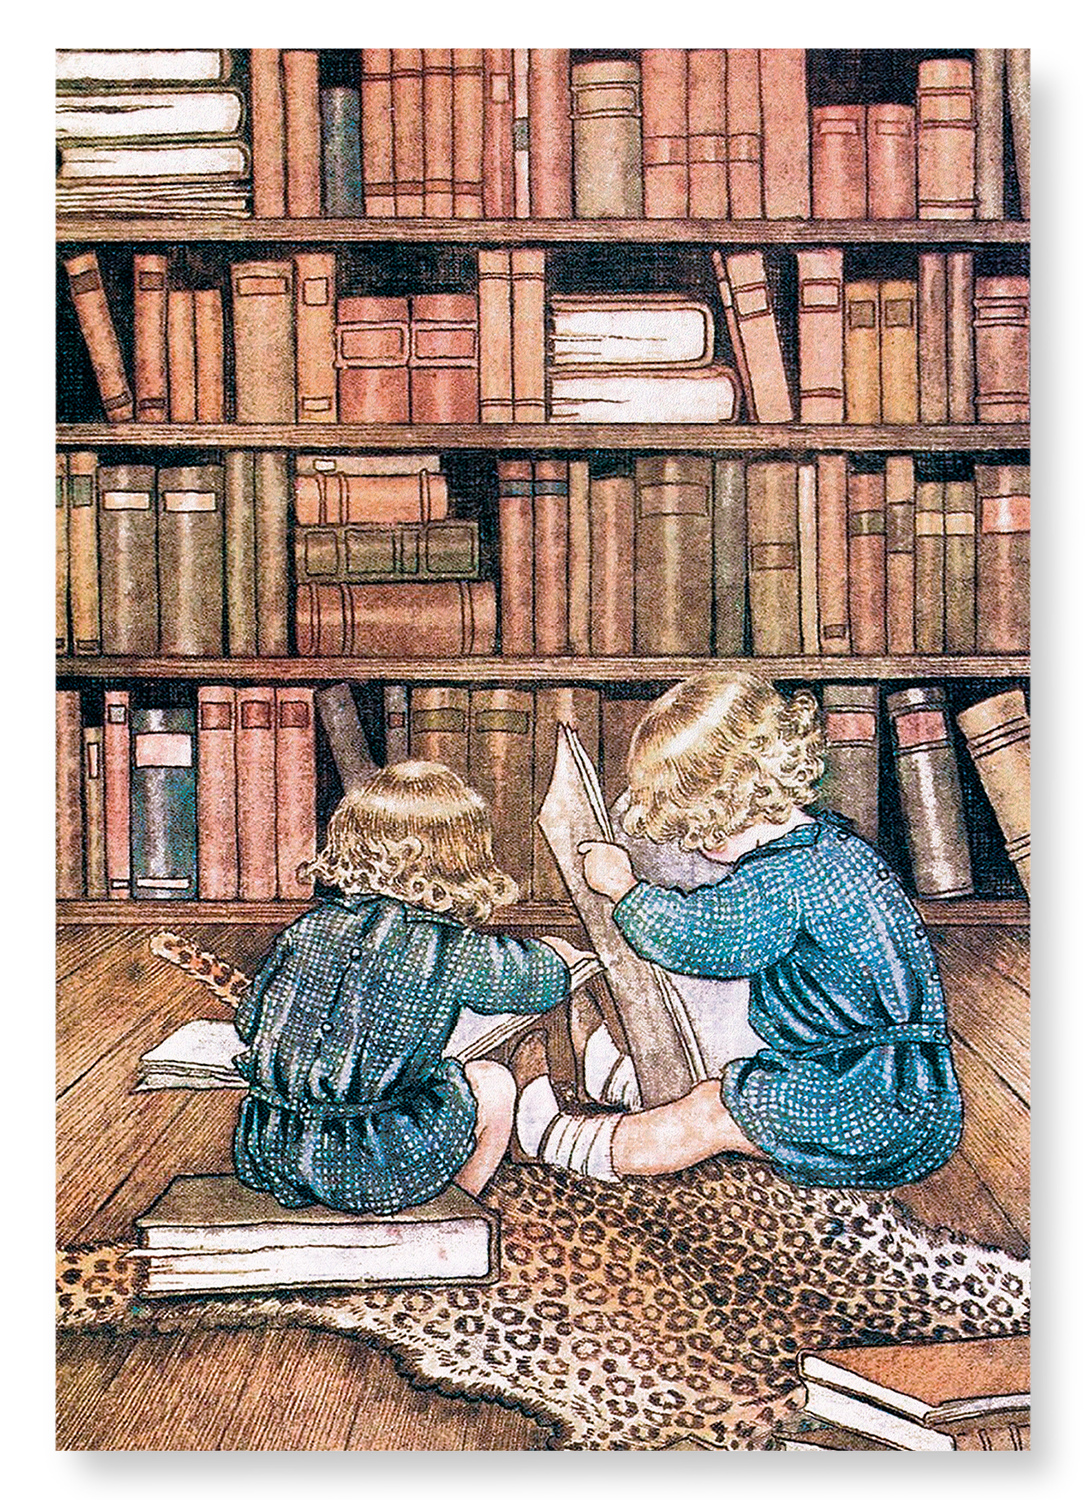 BOOKWORMS BY OUTHWAITE: Painting Art Print